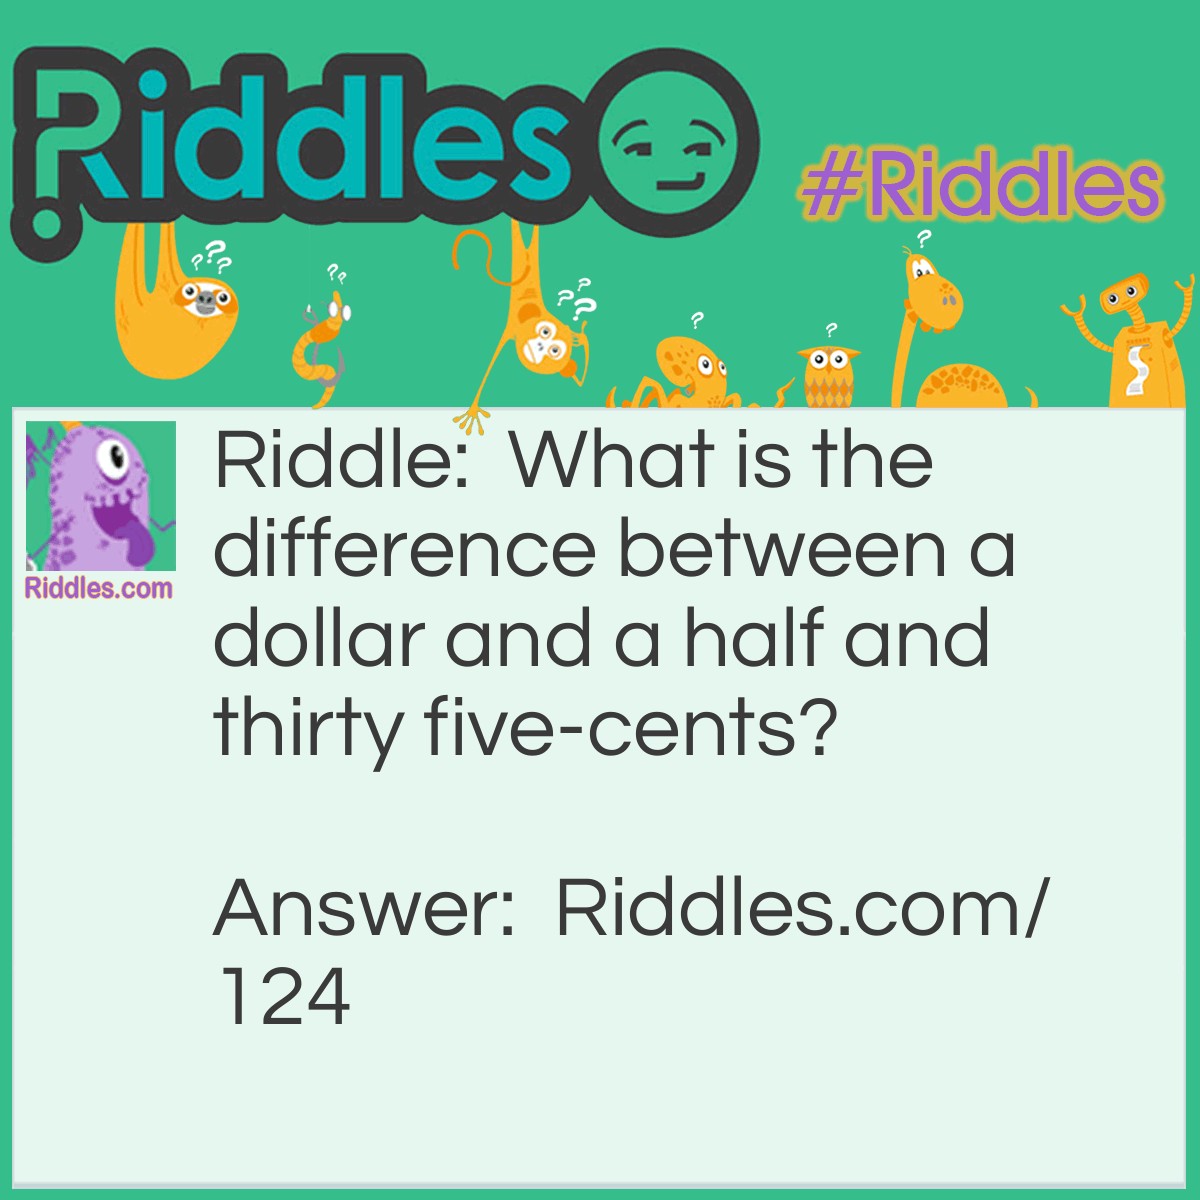 Riddle: What is the difference between a dollar and a half and thirty five-cents? Answer: Nothing. A dollar and a half is the same as thirty five-cents (nickels). But not the same as thirty-five cents.